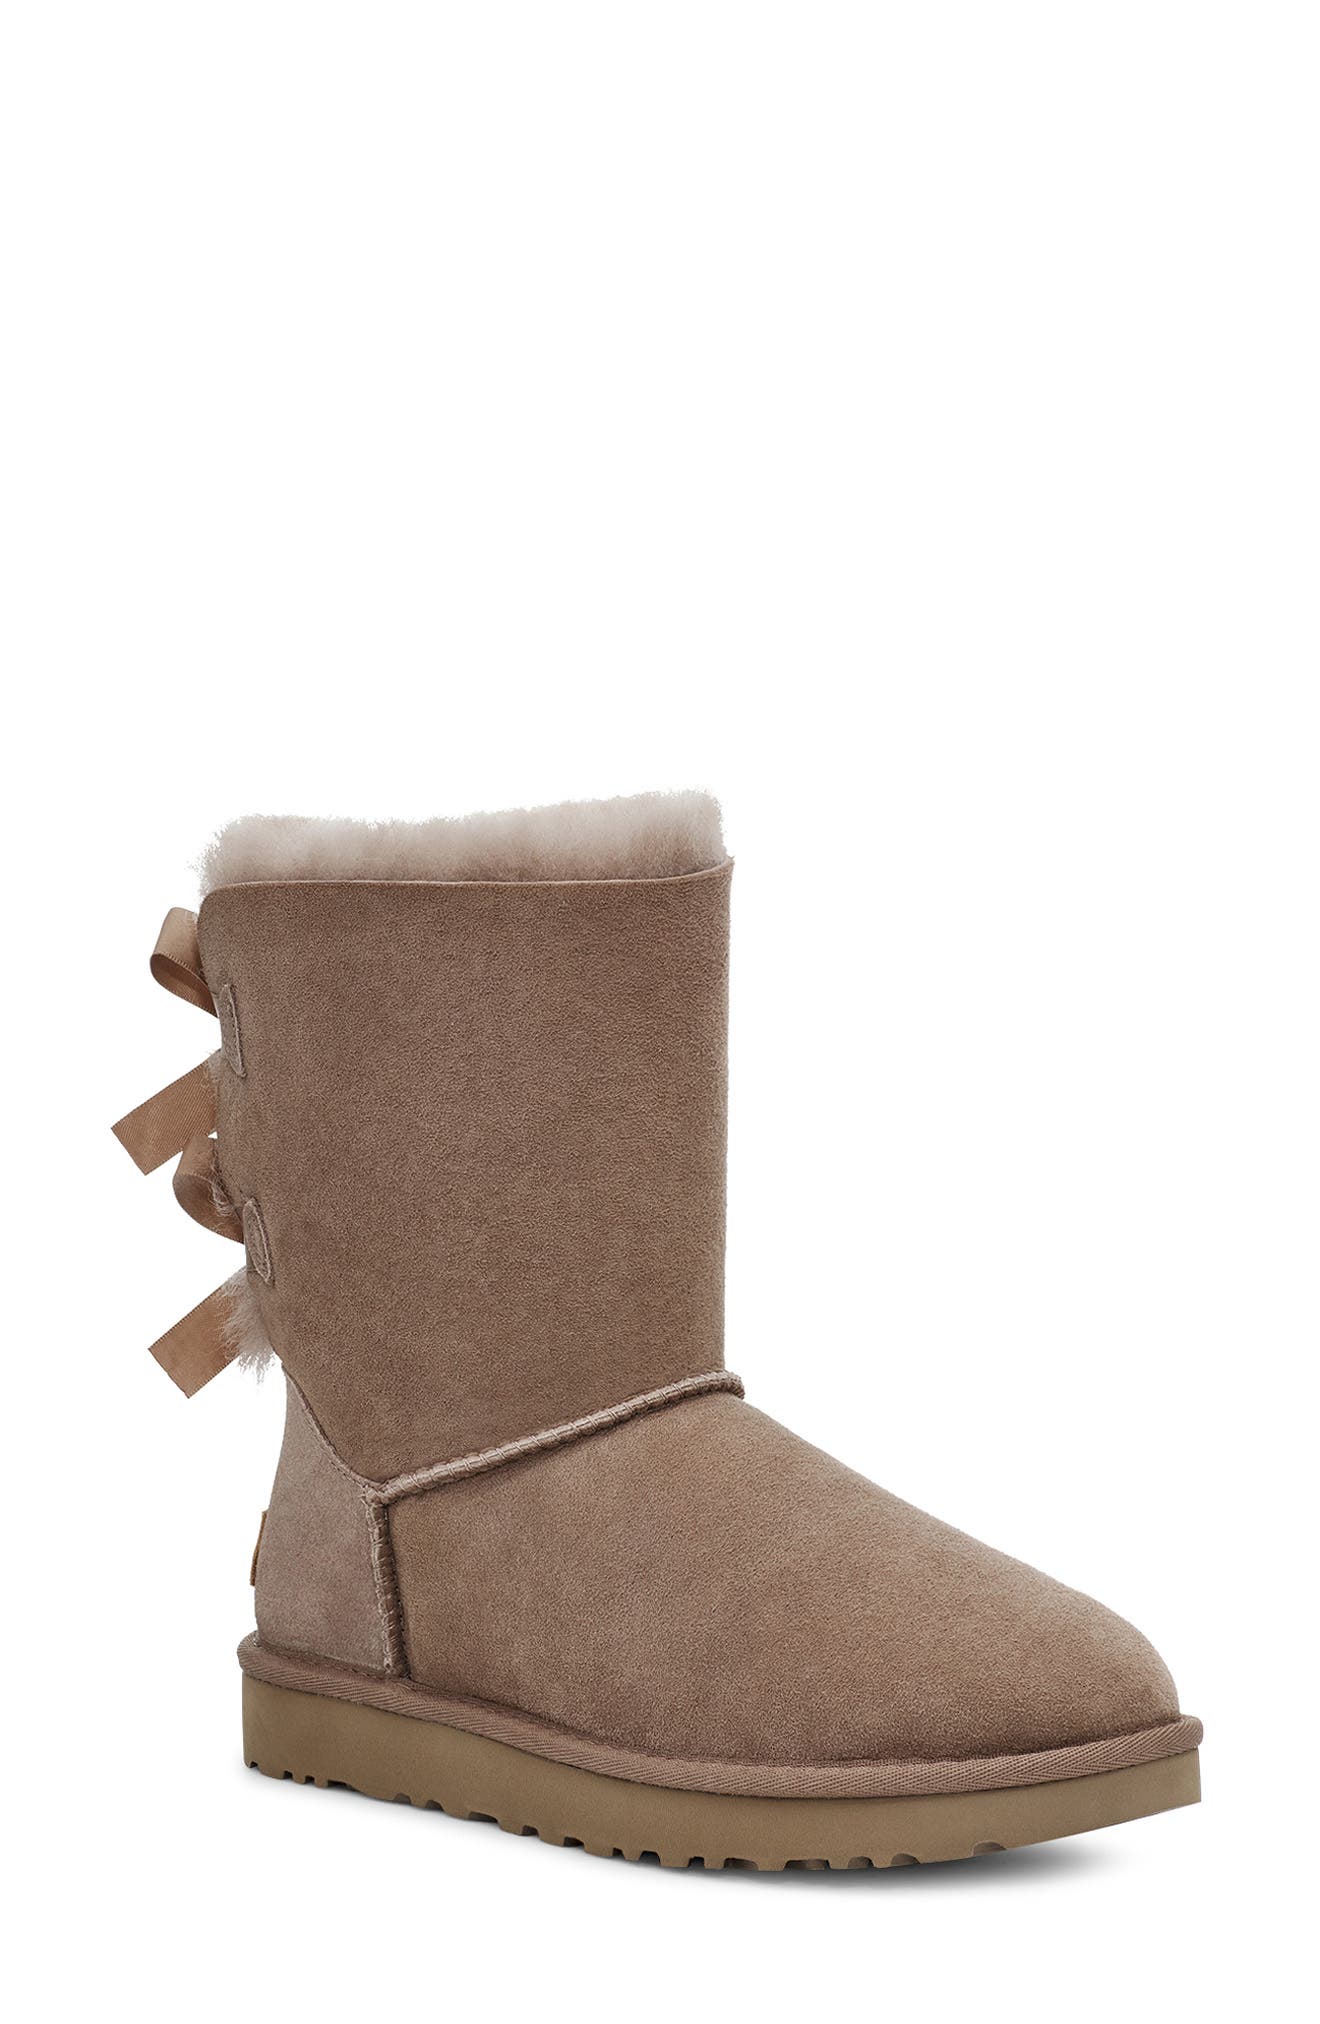 nordstrom ugg bailey bow